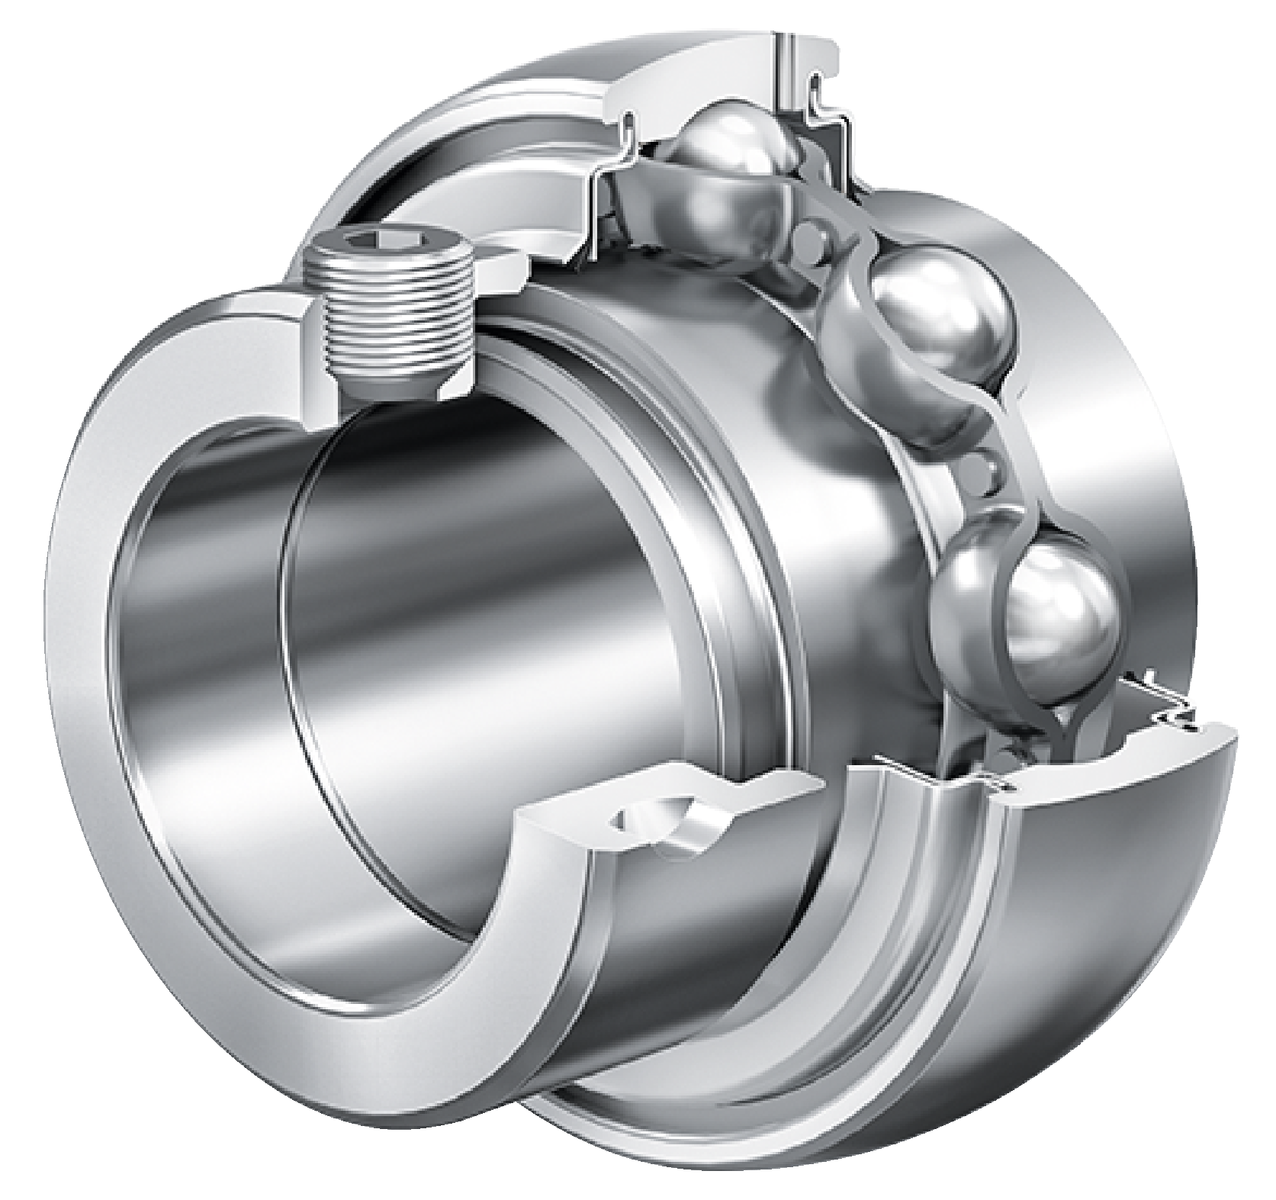 Radial Insert Ball Bearing GE..-KRR-B-FA164, Spherical Outer Ring, Eccentric Locking Collar, R Seals on Both Sides, High Temperature